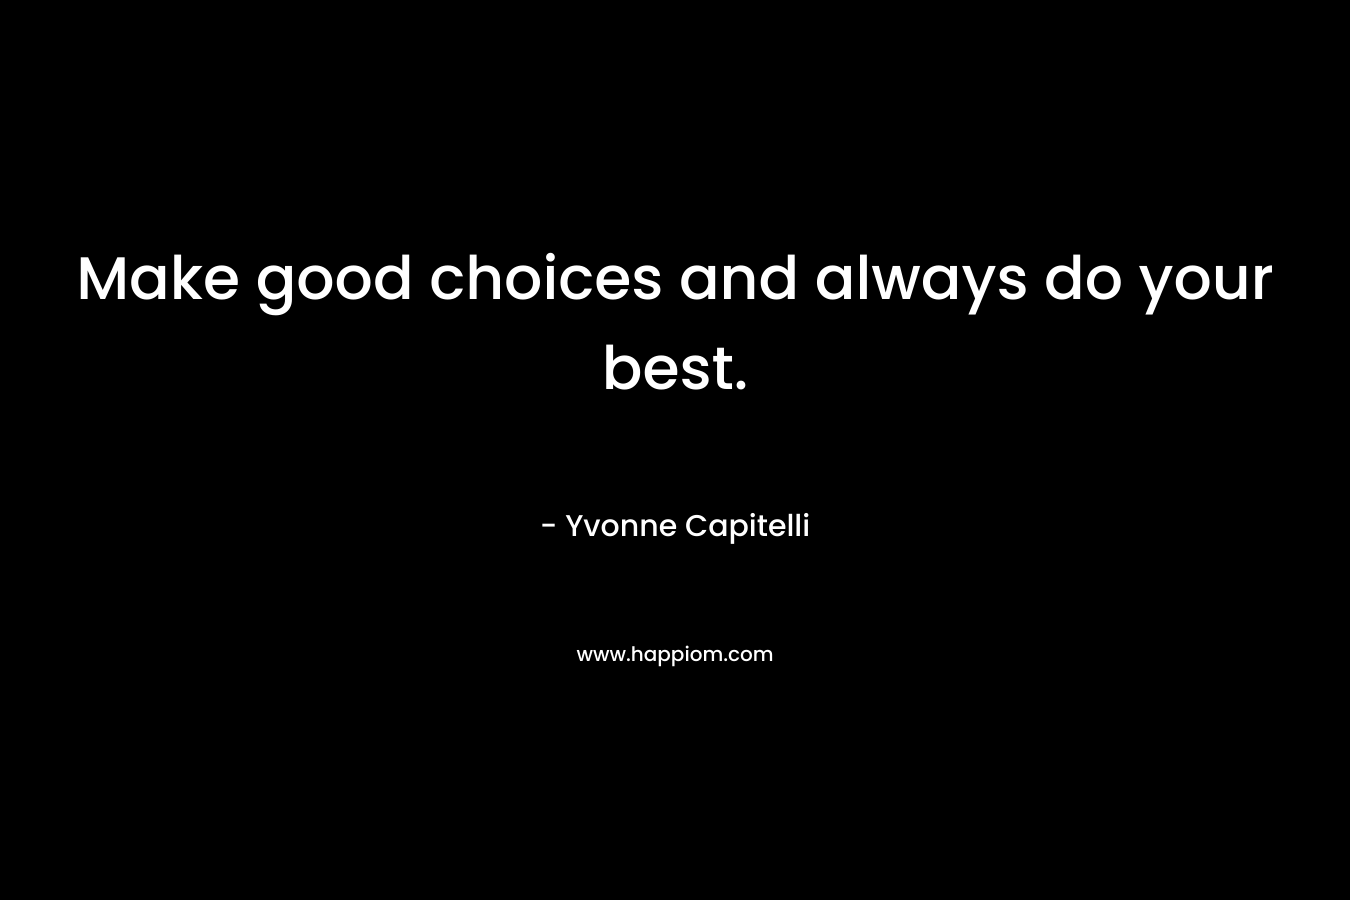 Make good choices and always do your best.